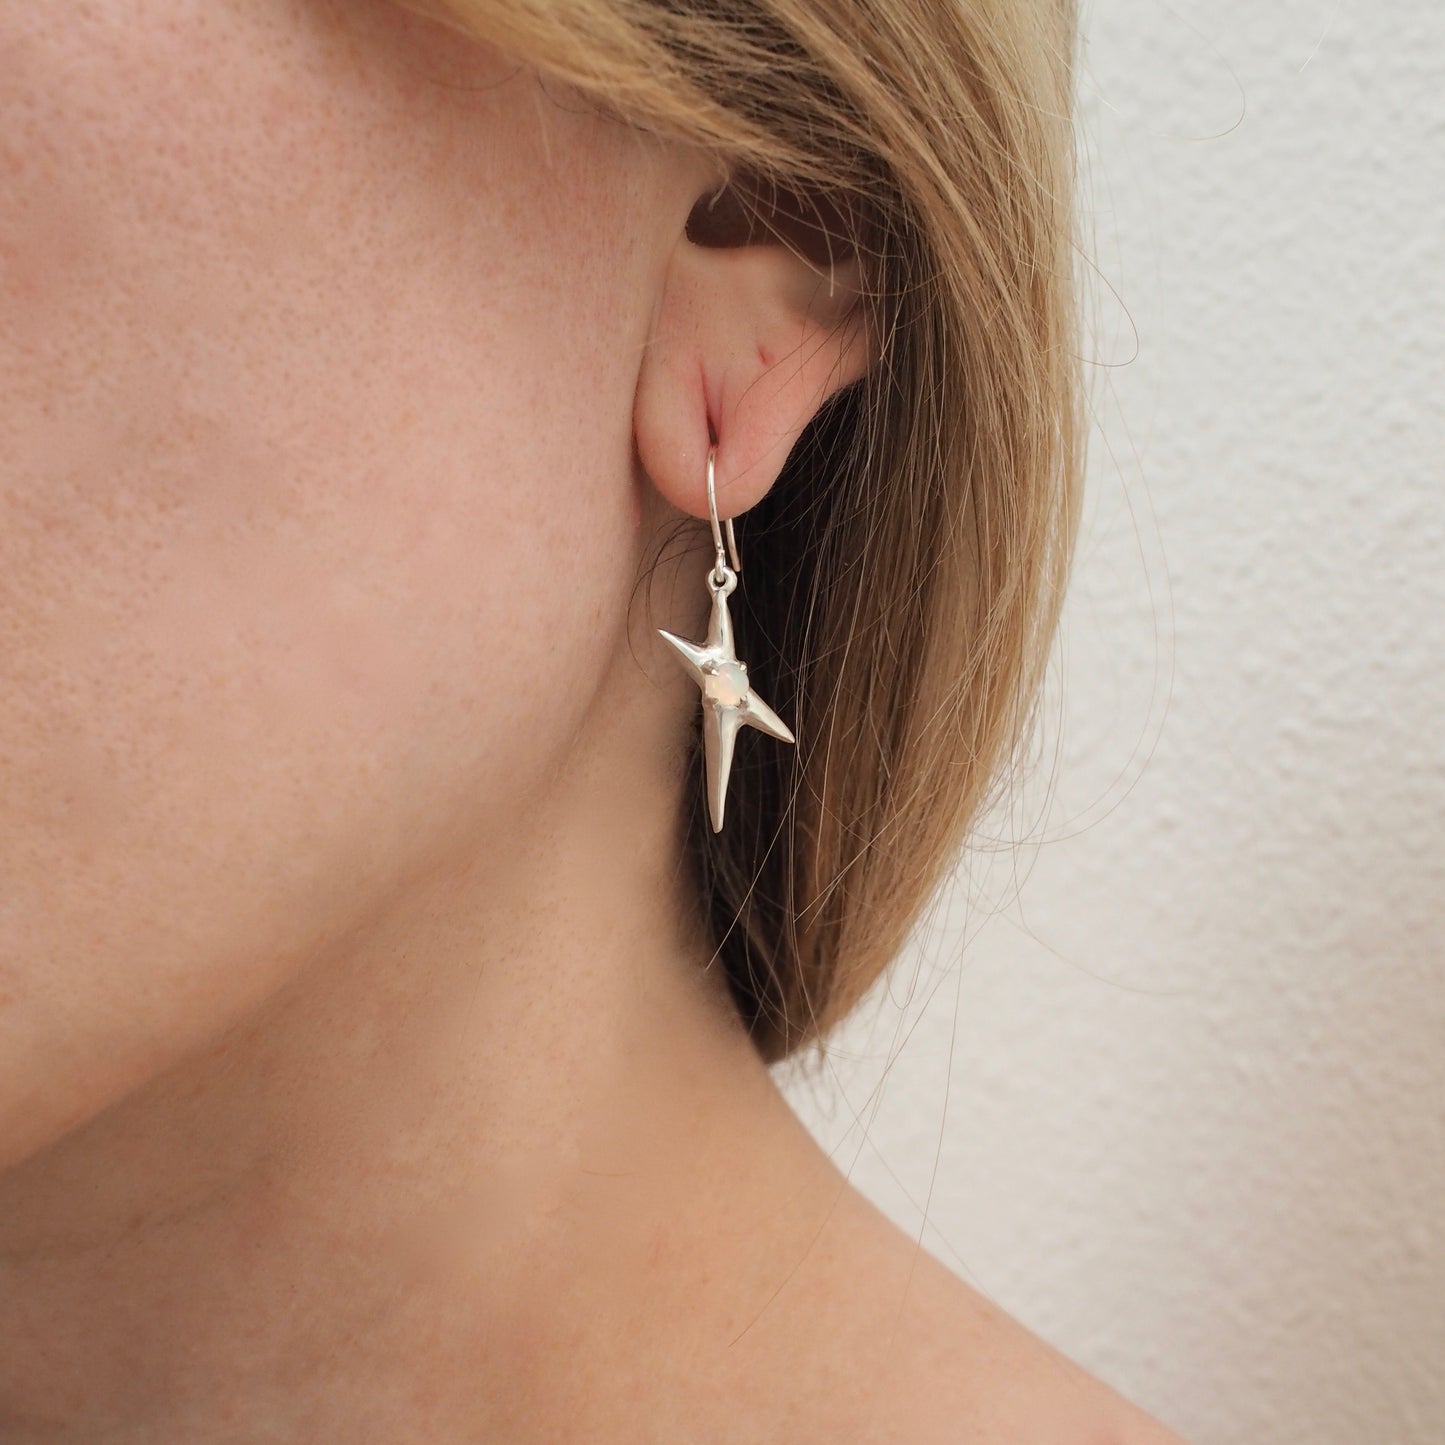 Spikey electric spark earrings set with sustainably sourced opal in sterling silver, shown on a model for scale